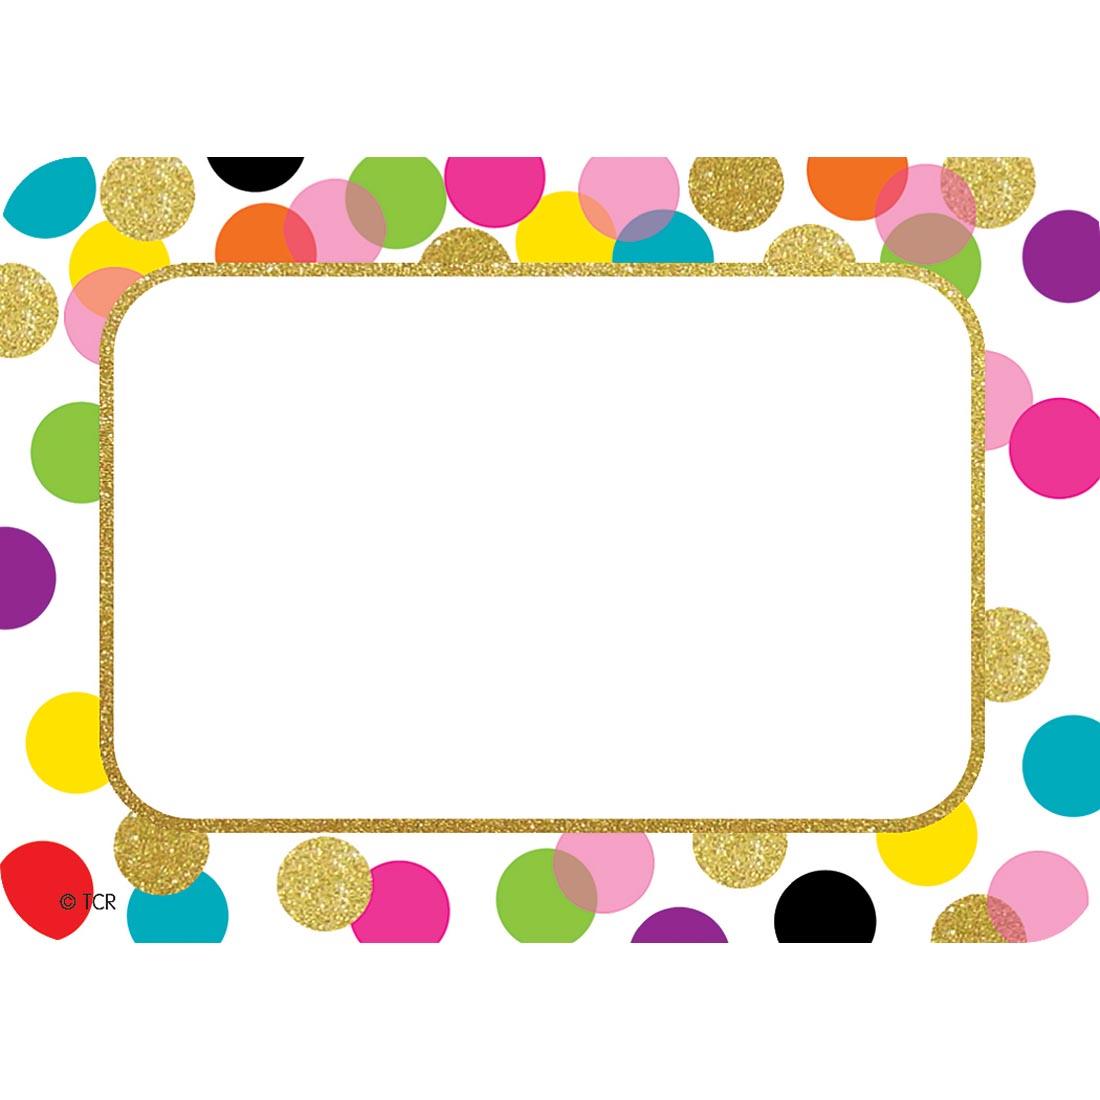 Name Tag/Label from the Confetti collection by Teacher Created Resources